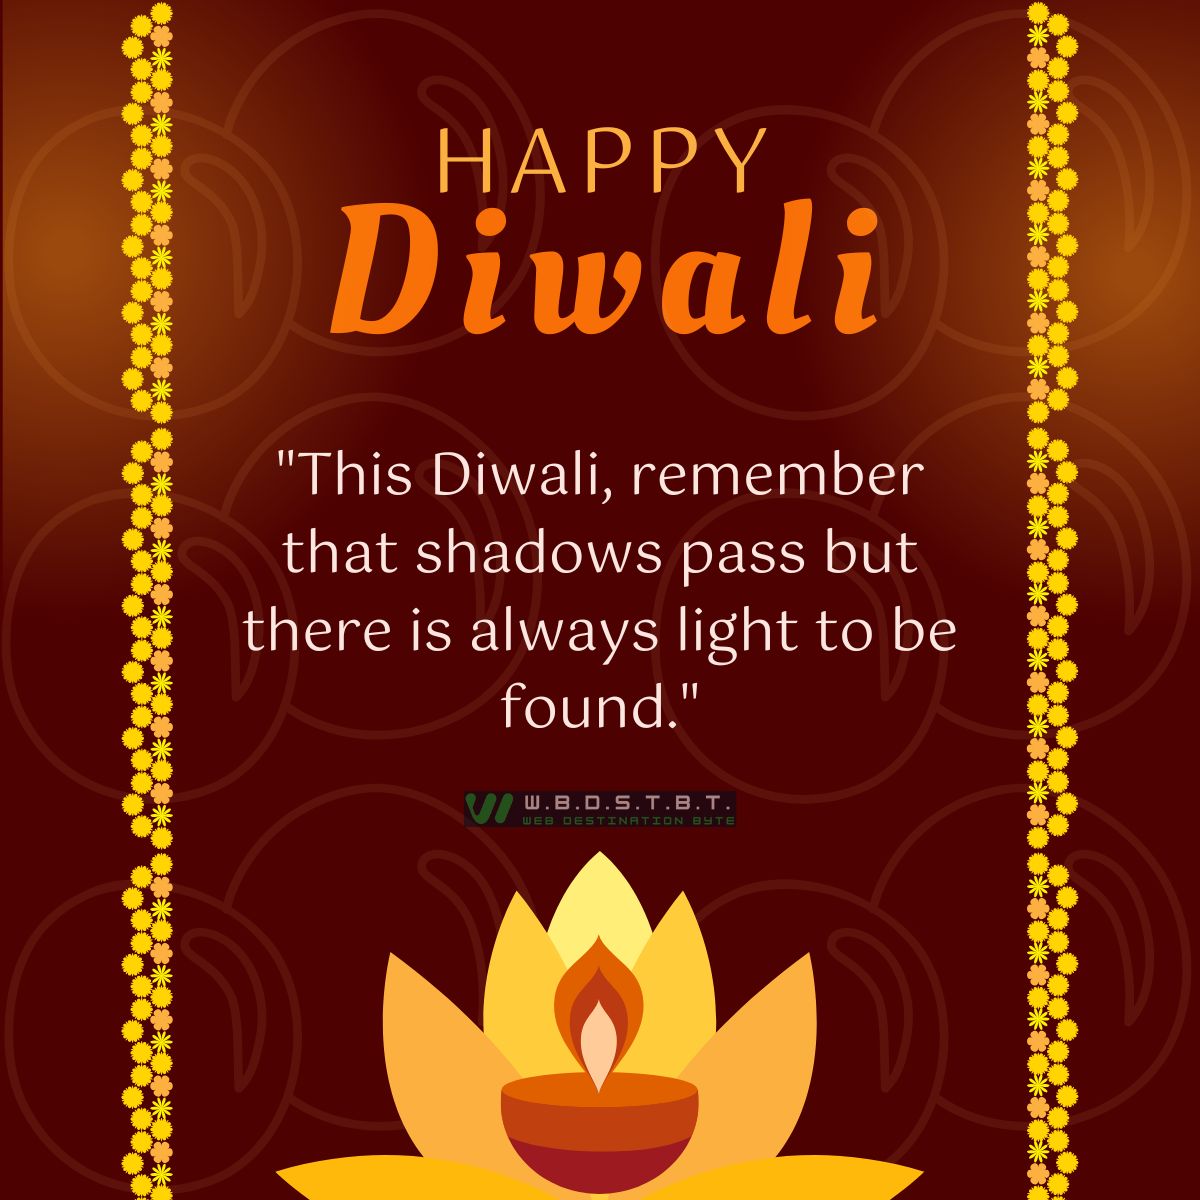 "This Diwali, remember that shadows pass but there is always light to be found."